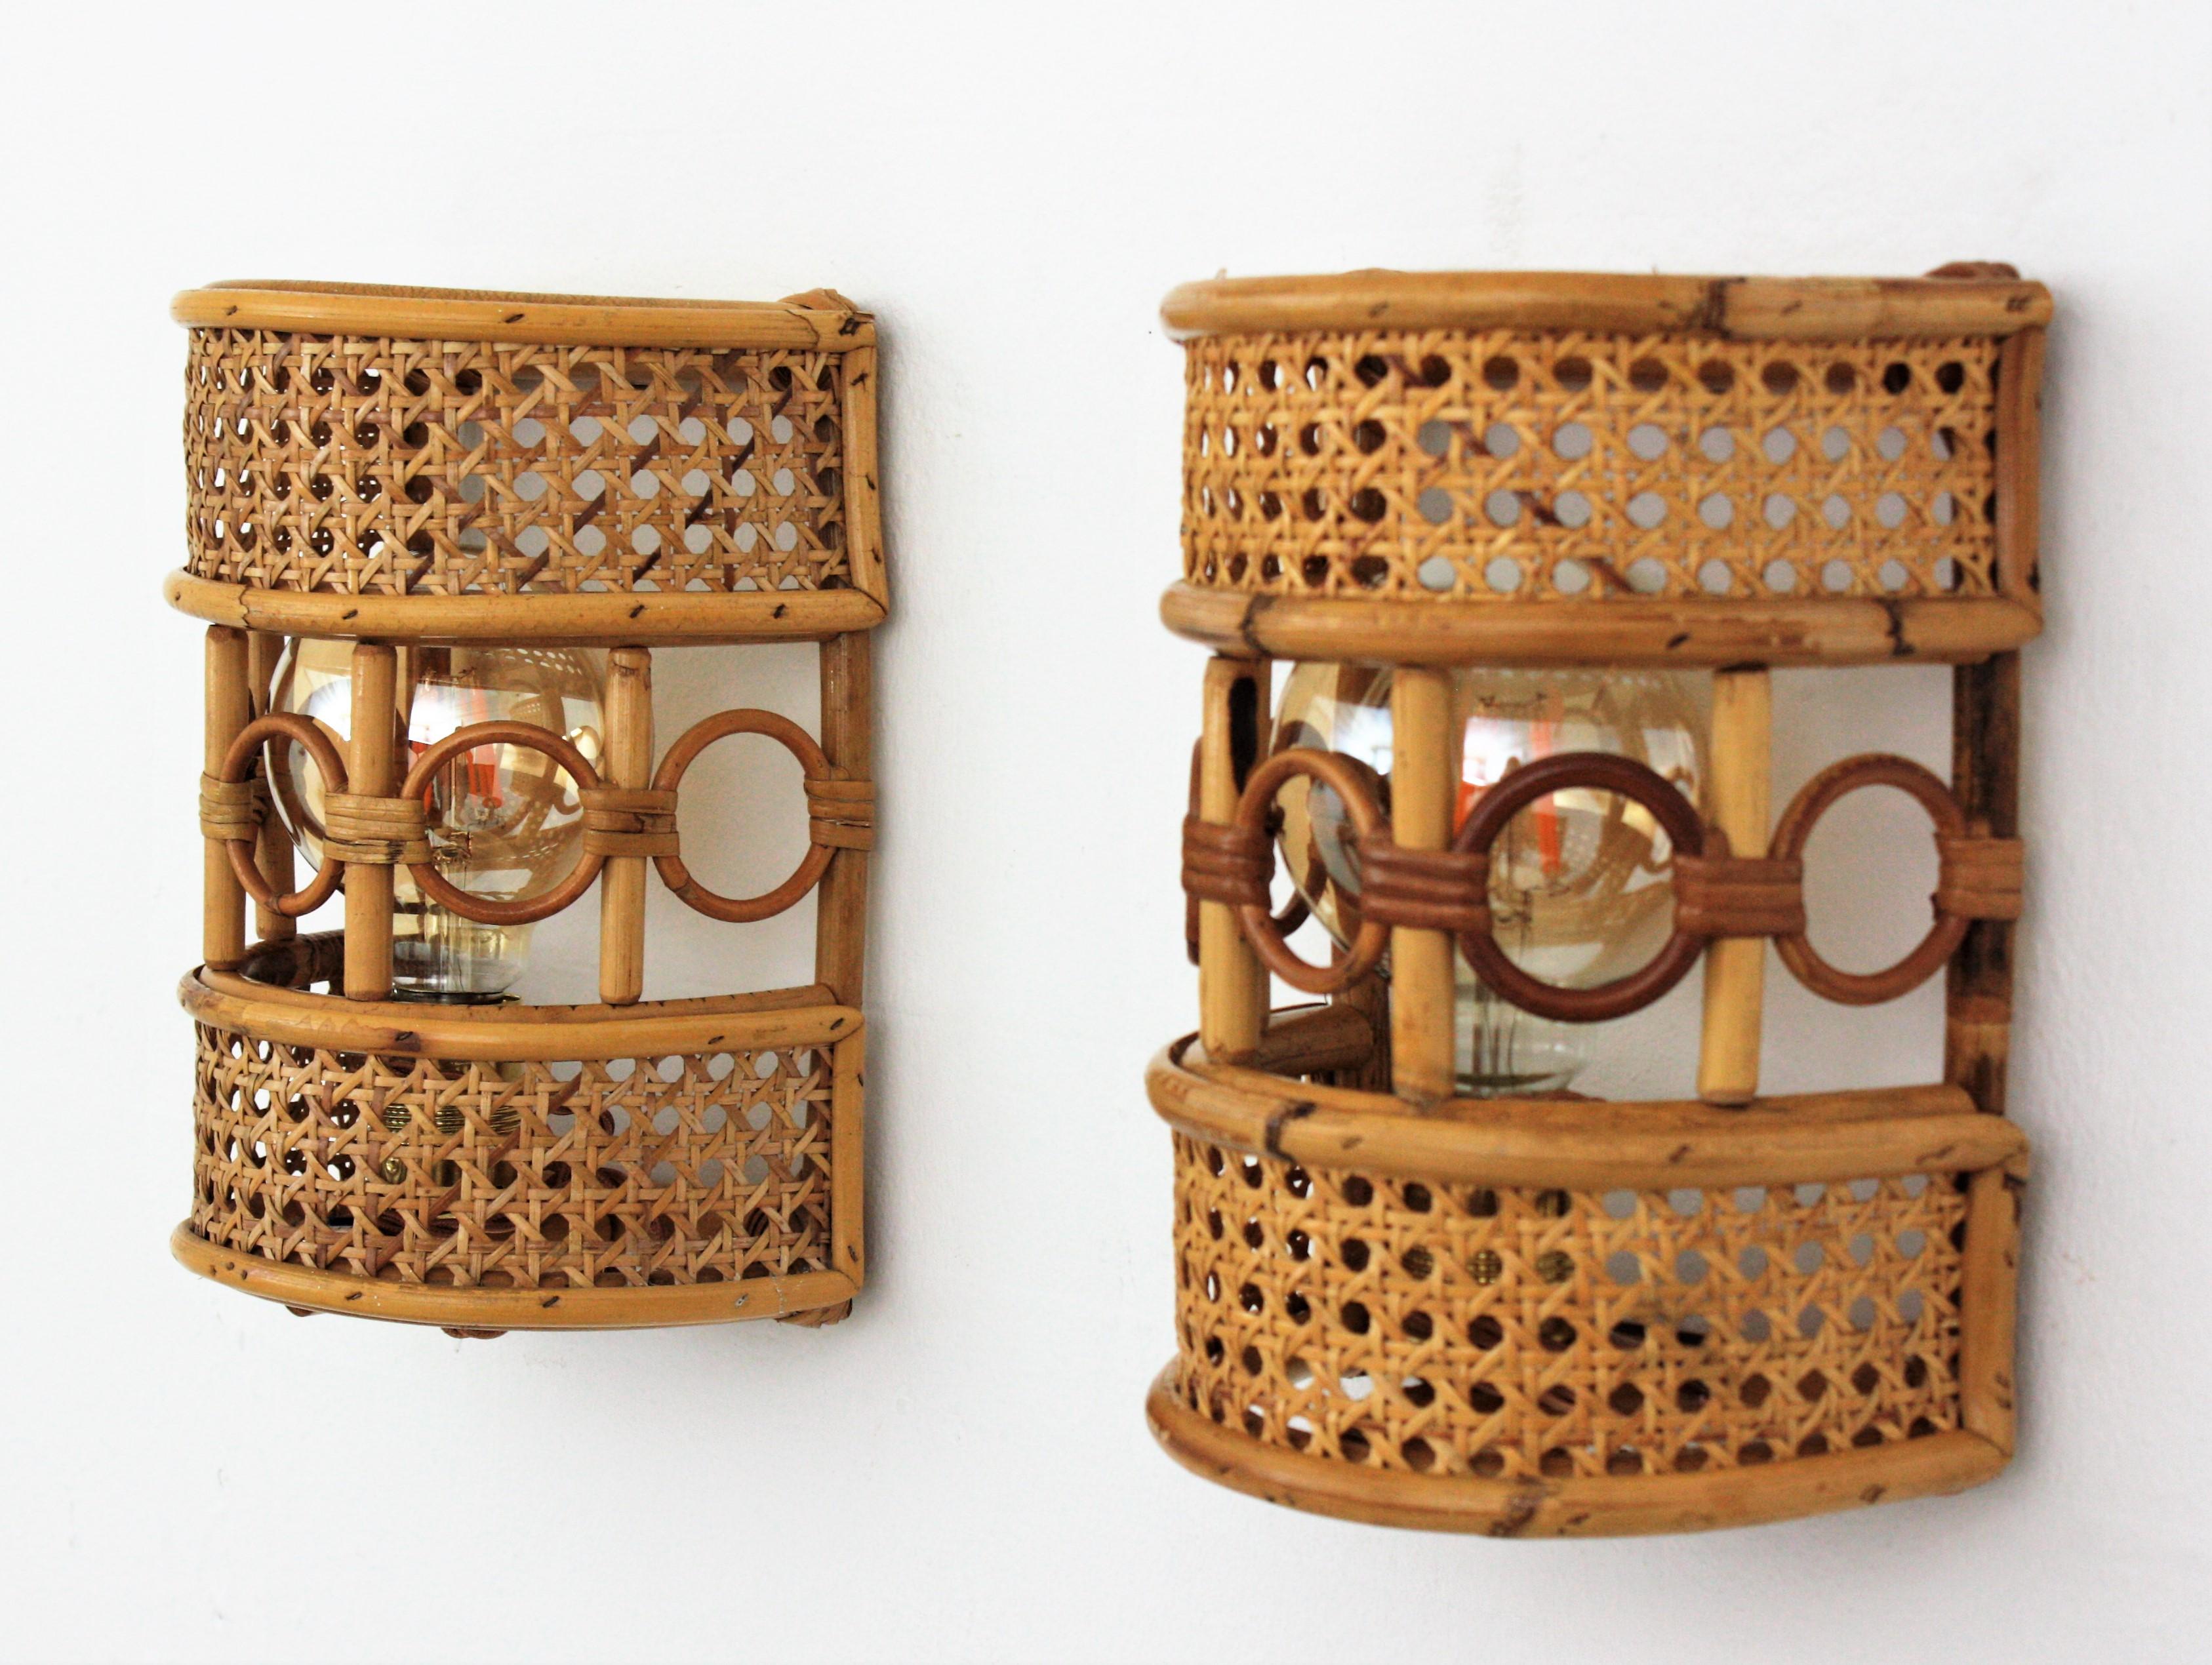 Pair of half cylinder wall lights with wicker / rattan woven shades accented by rattan circles. Italy, 1960s.
These light fixtures are made with wicker basket weave panels on a rattan semi cylindrical structure. They have a beautiful decoration